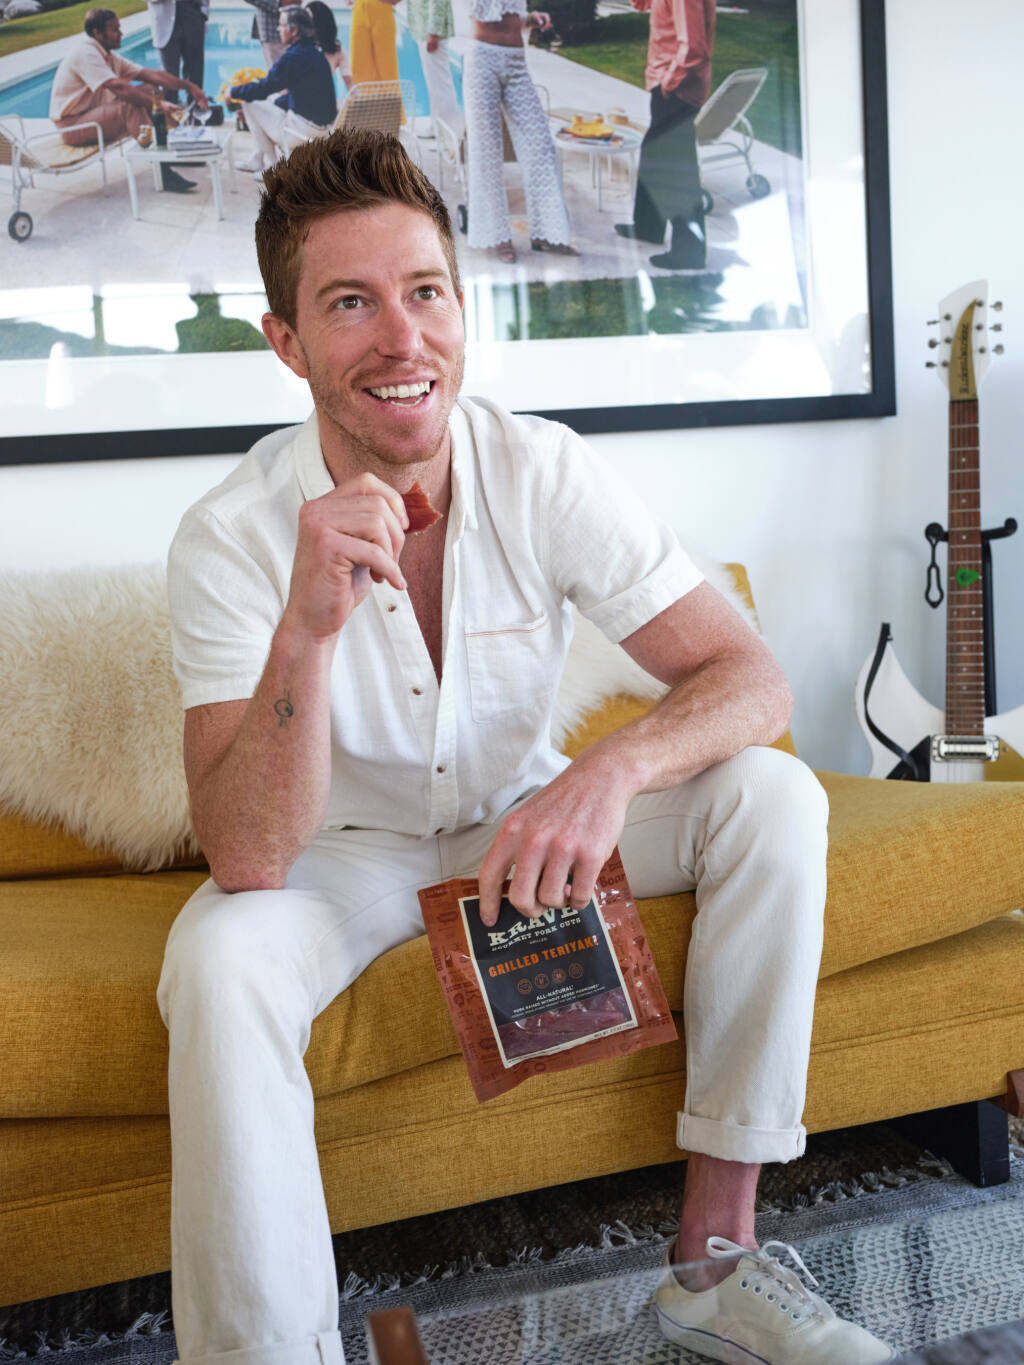 Shaun White Debuts New Snowboard to Launch Active Lifestyle Brand